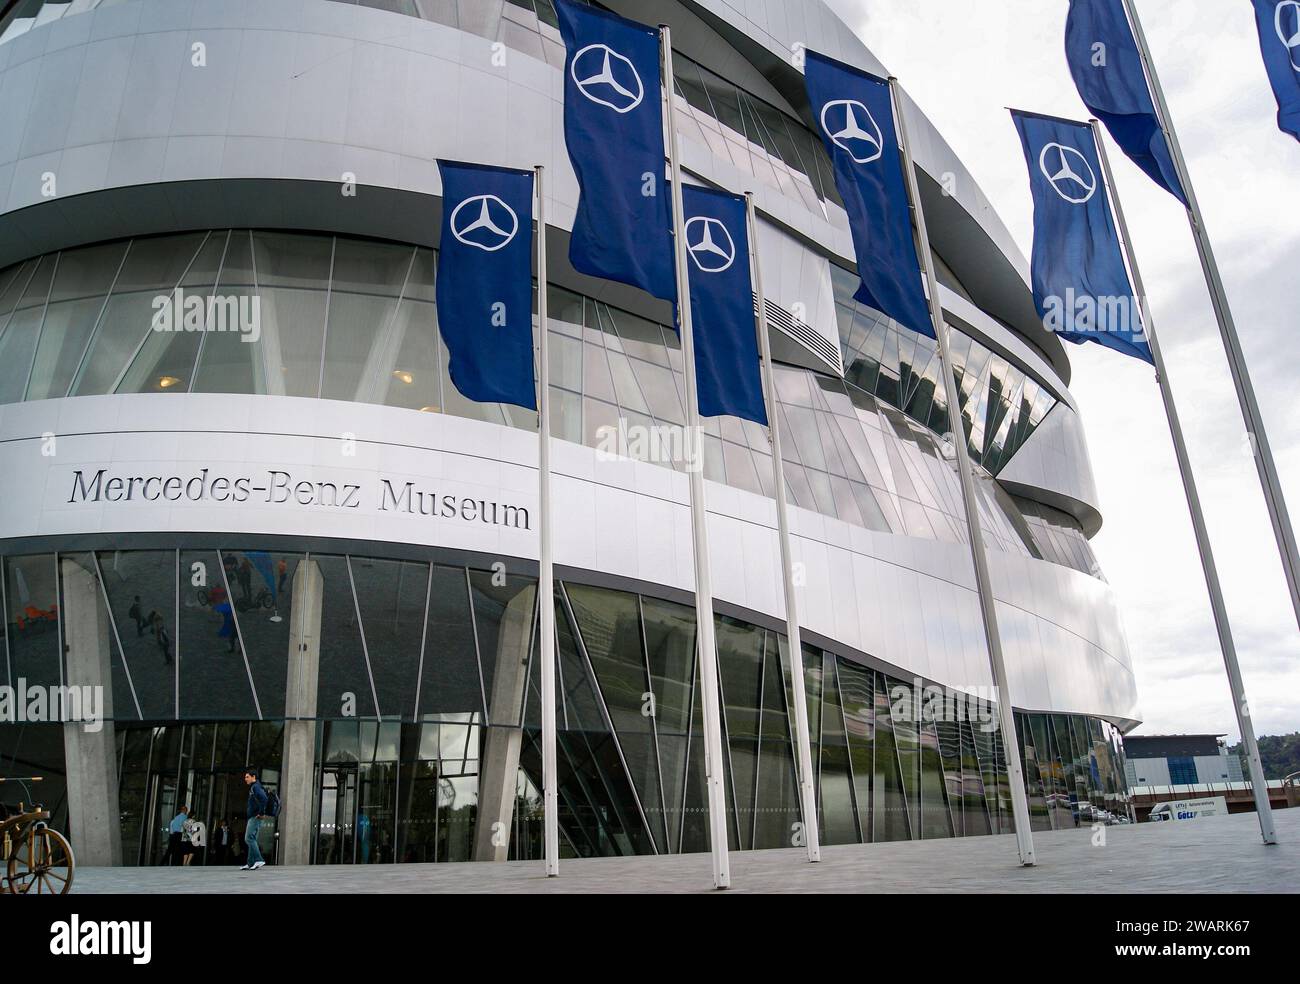 Stuttgart, Germany - 28 August 2010: The Mercedes-Benz Museum in Stuttgart, designed by UN Studio, opened in 2006. It covers the history of the Merced Stock Photo